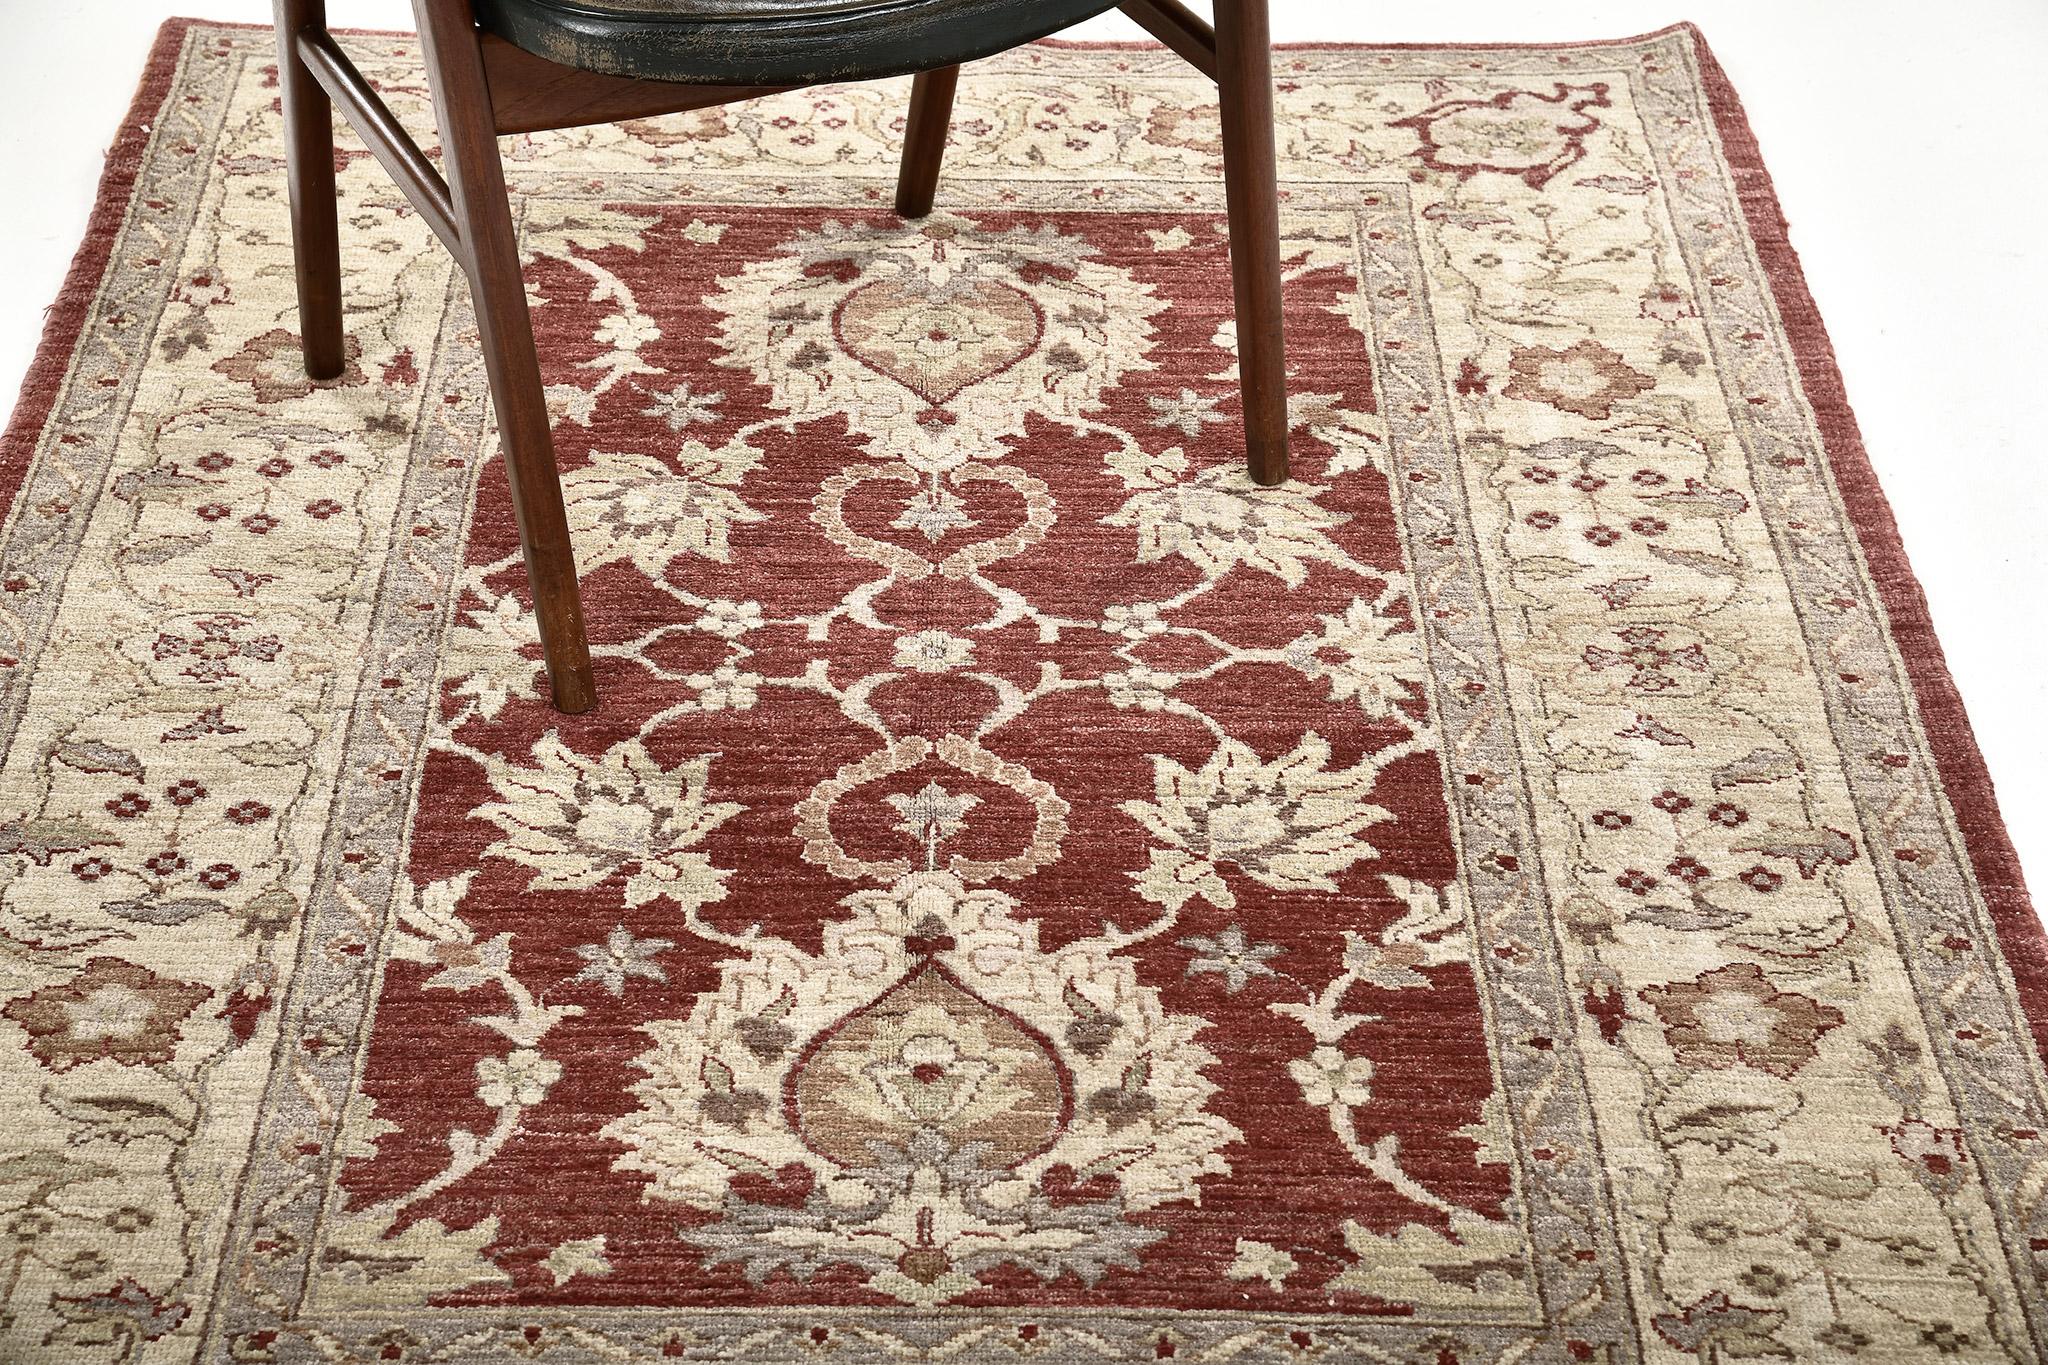 A vibrant Sultanabad Design rug in Divine Collection that beguiles you to an all-over pattern of botanical elements unified in creating this magnificent piece. The abrashed ruby field is covered by majestic patterns of blooming palmettes, alluring